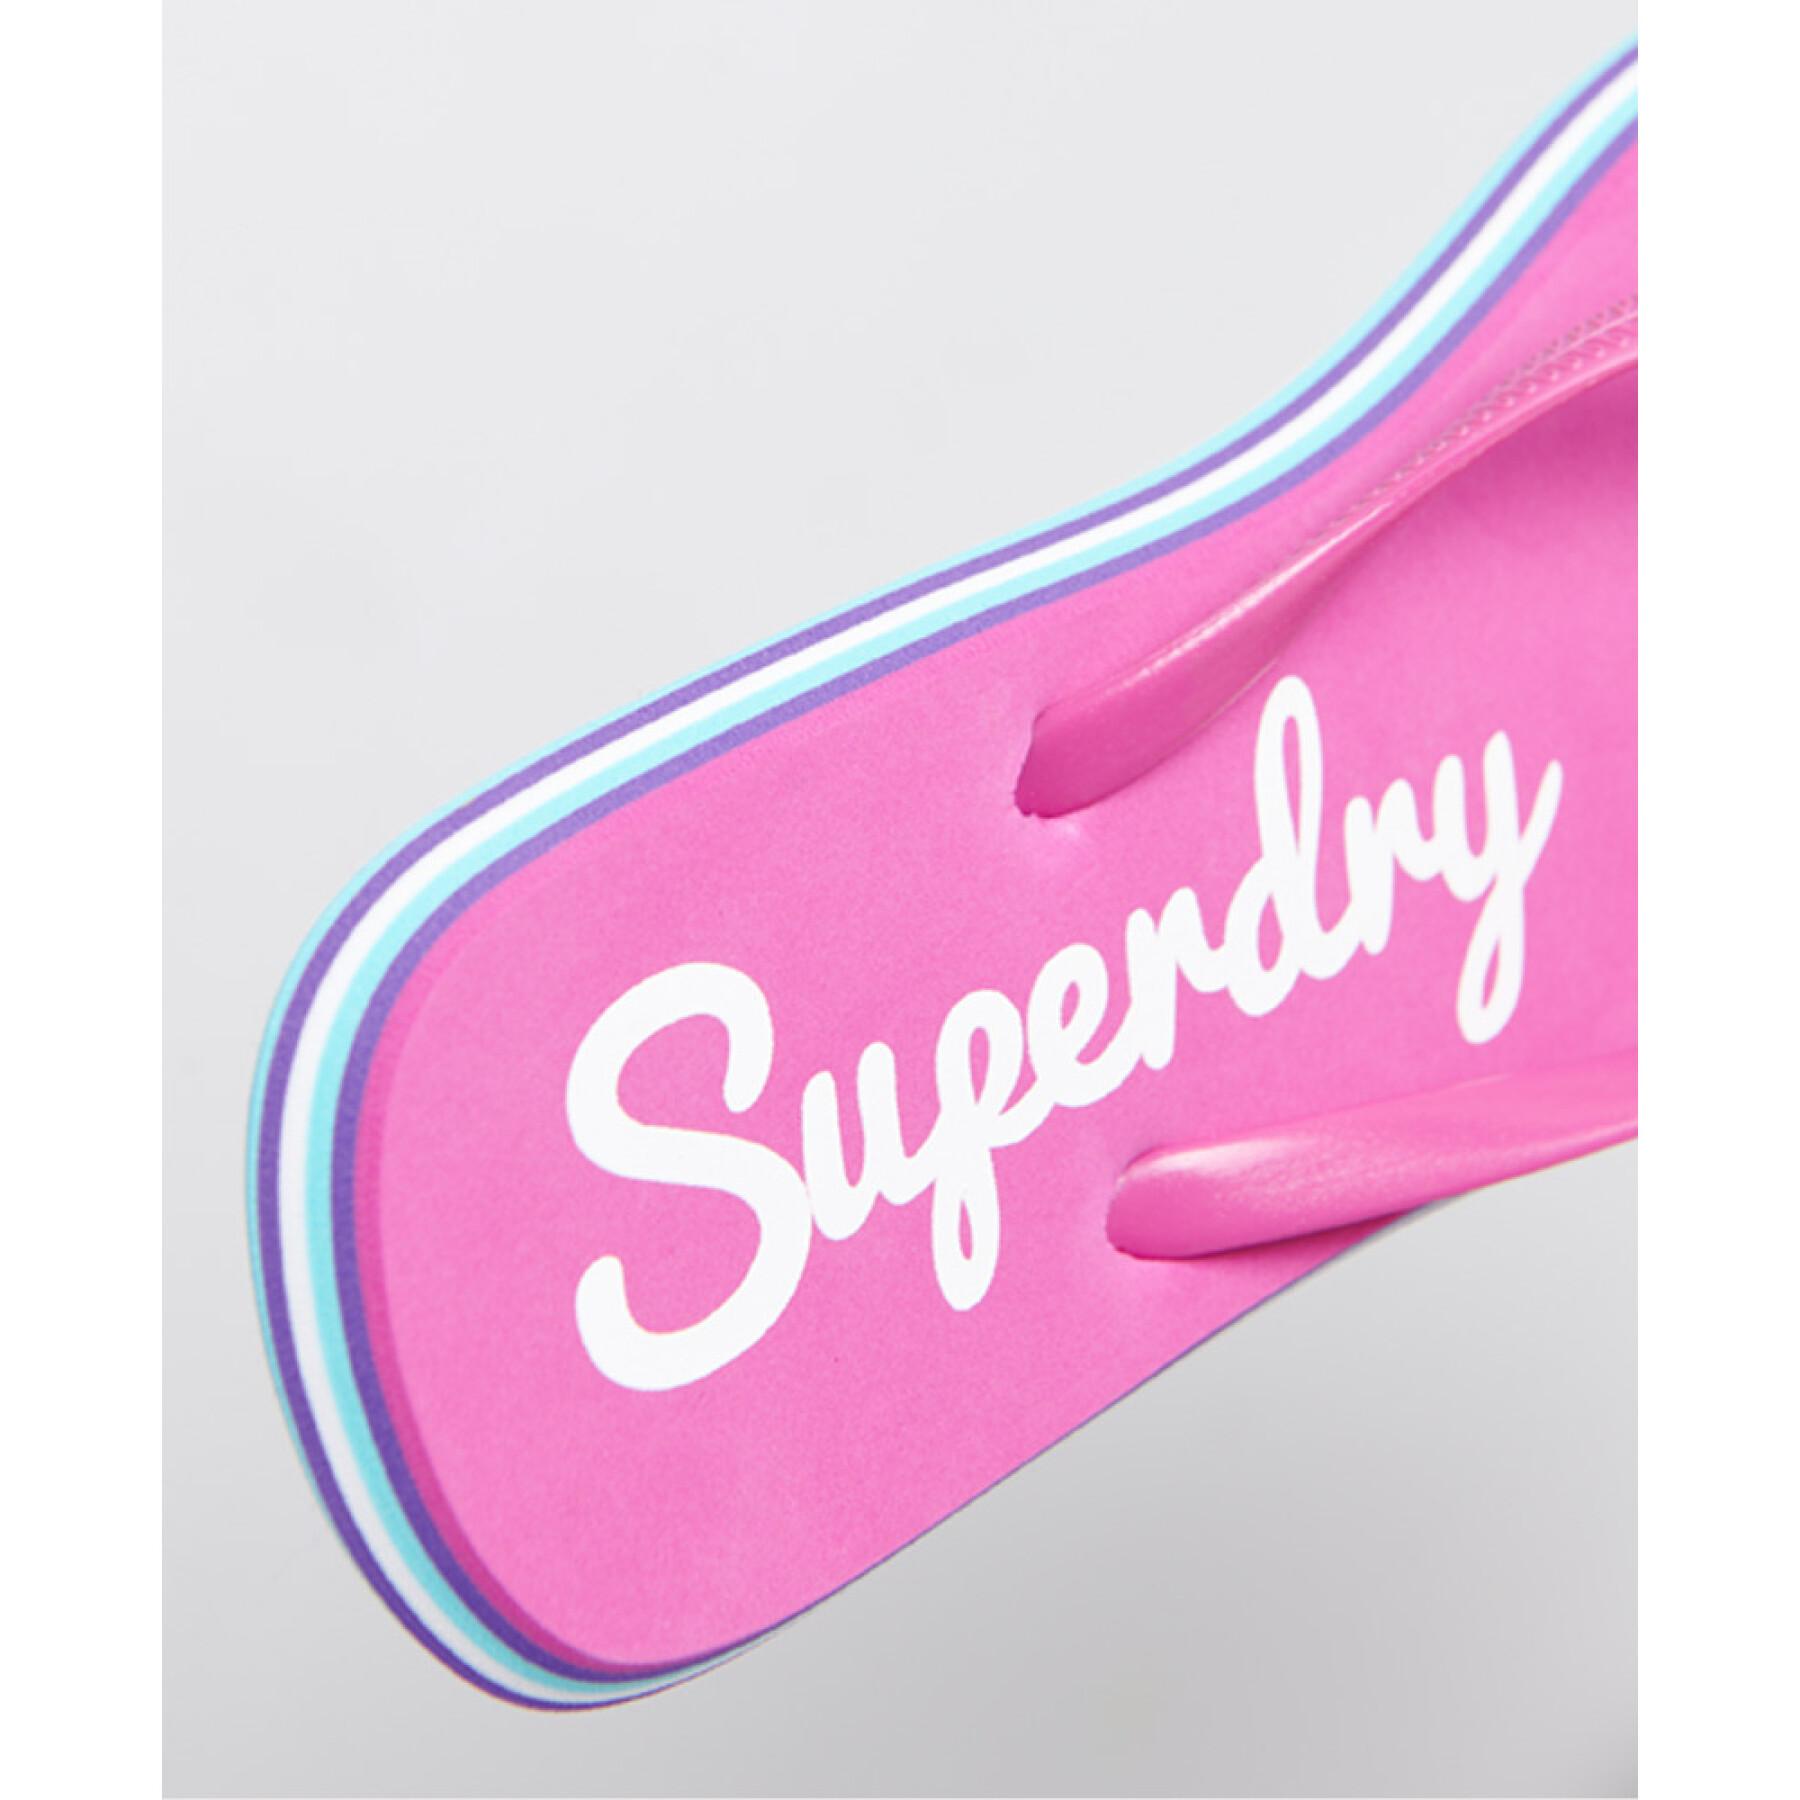 Dames slippers Superdry Rainbow